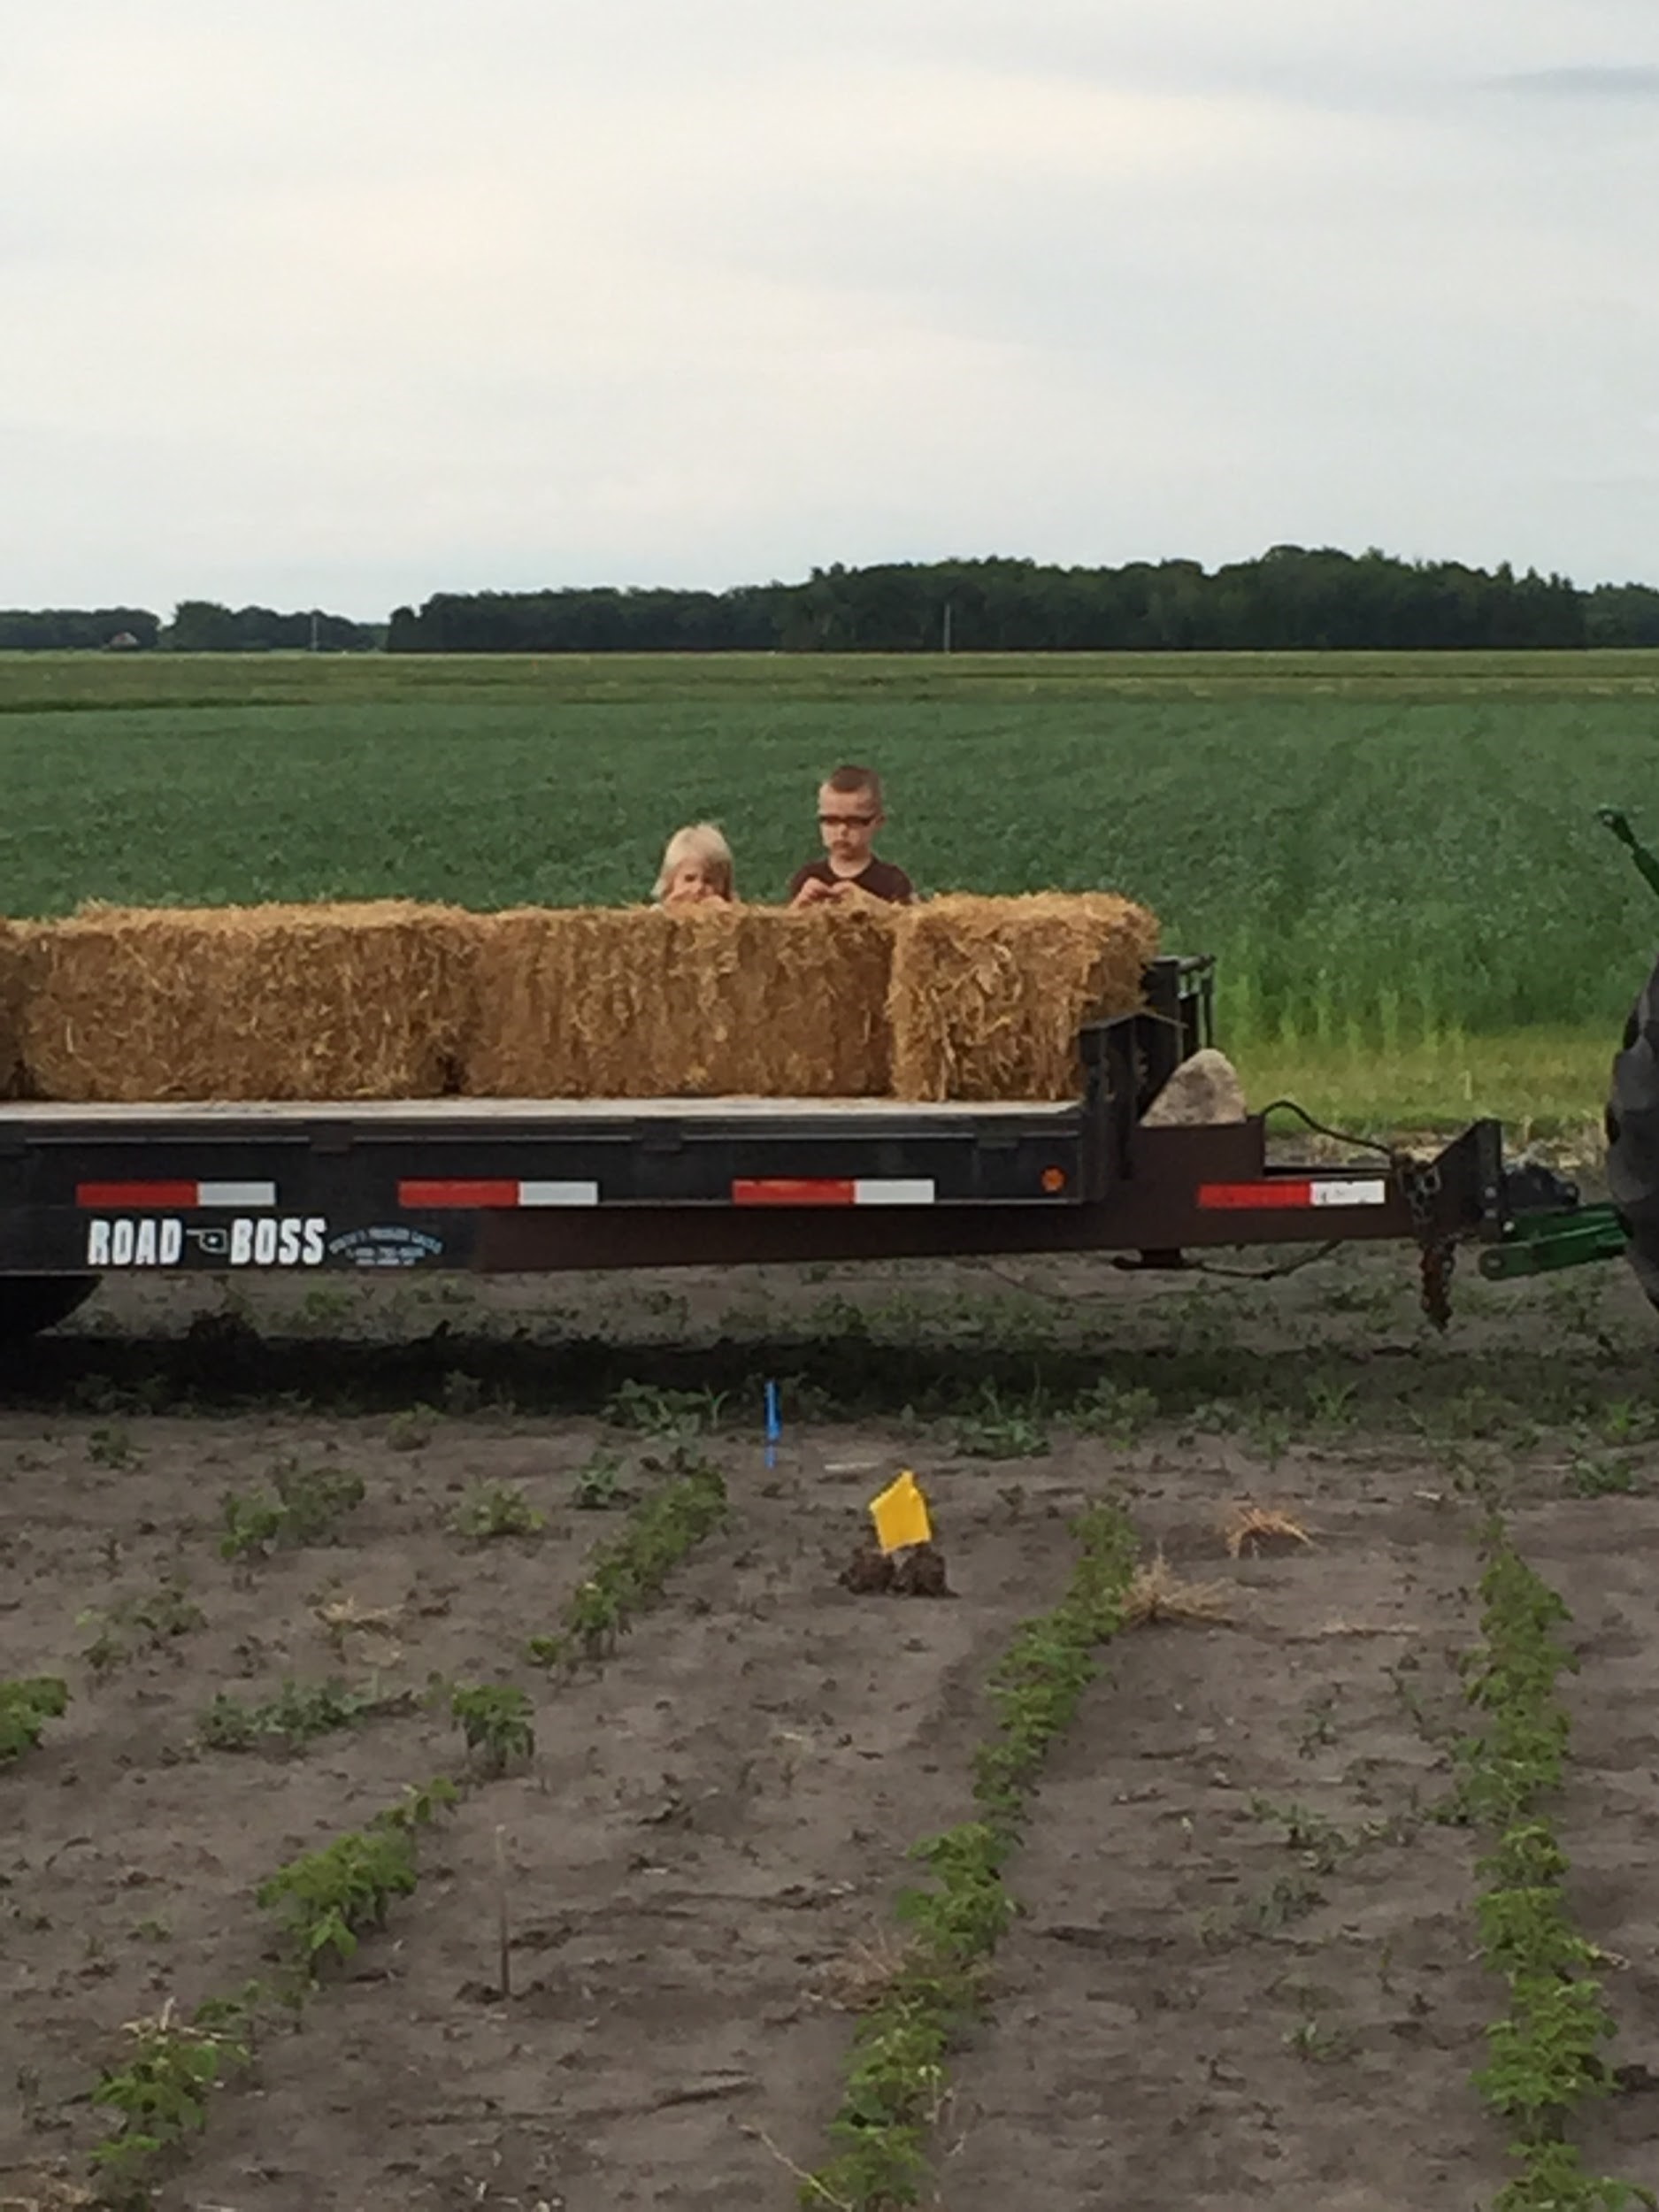 Two children playing behind bales of hay